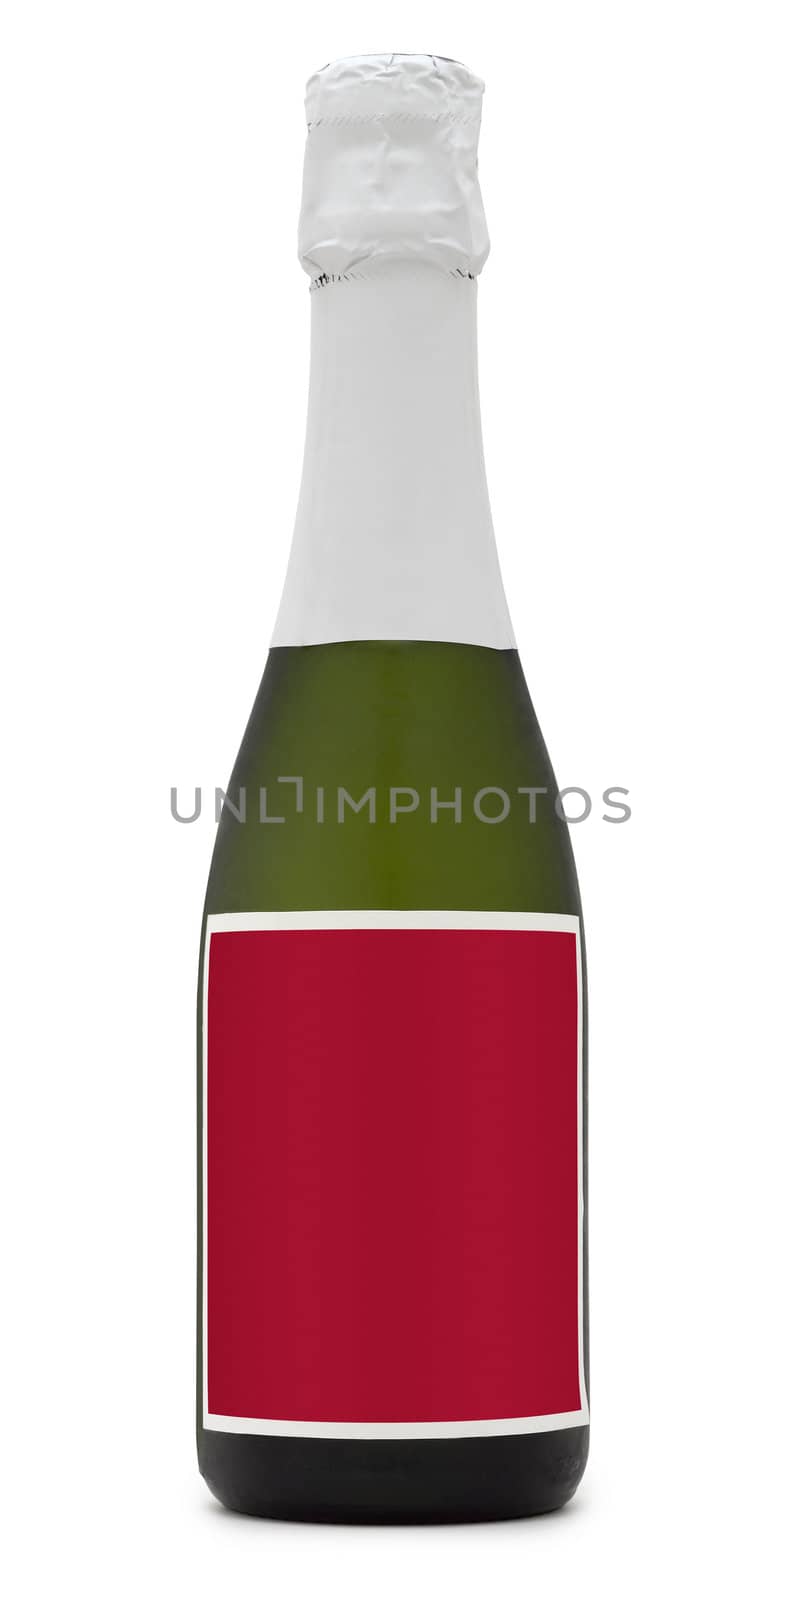 Bottle of champagne (clipping path).There is a path for label